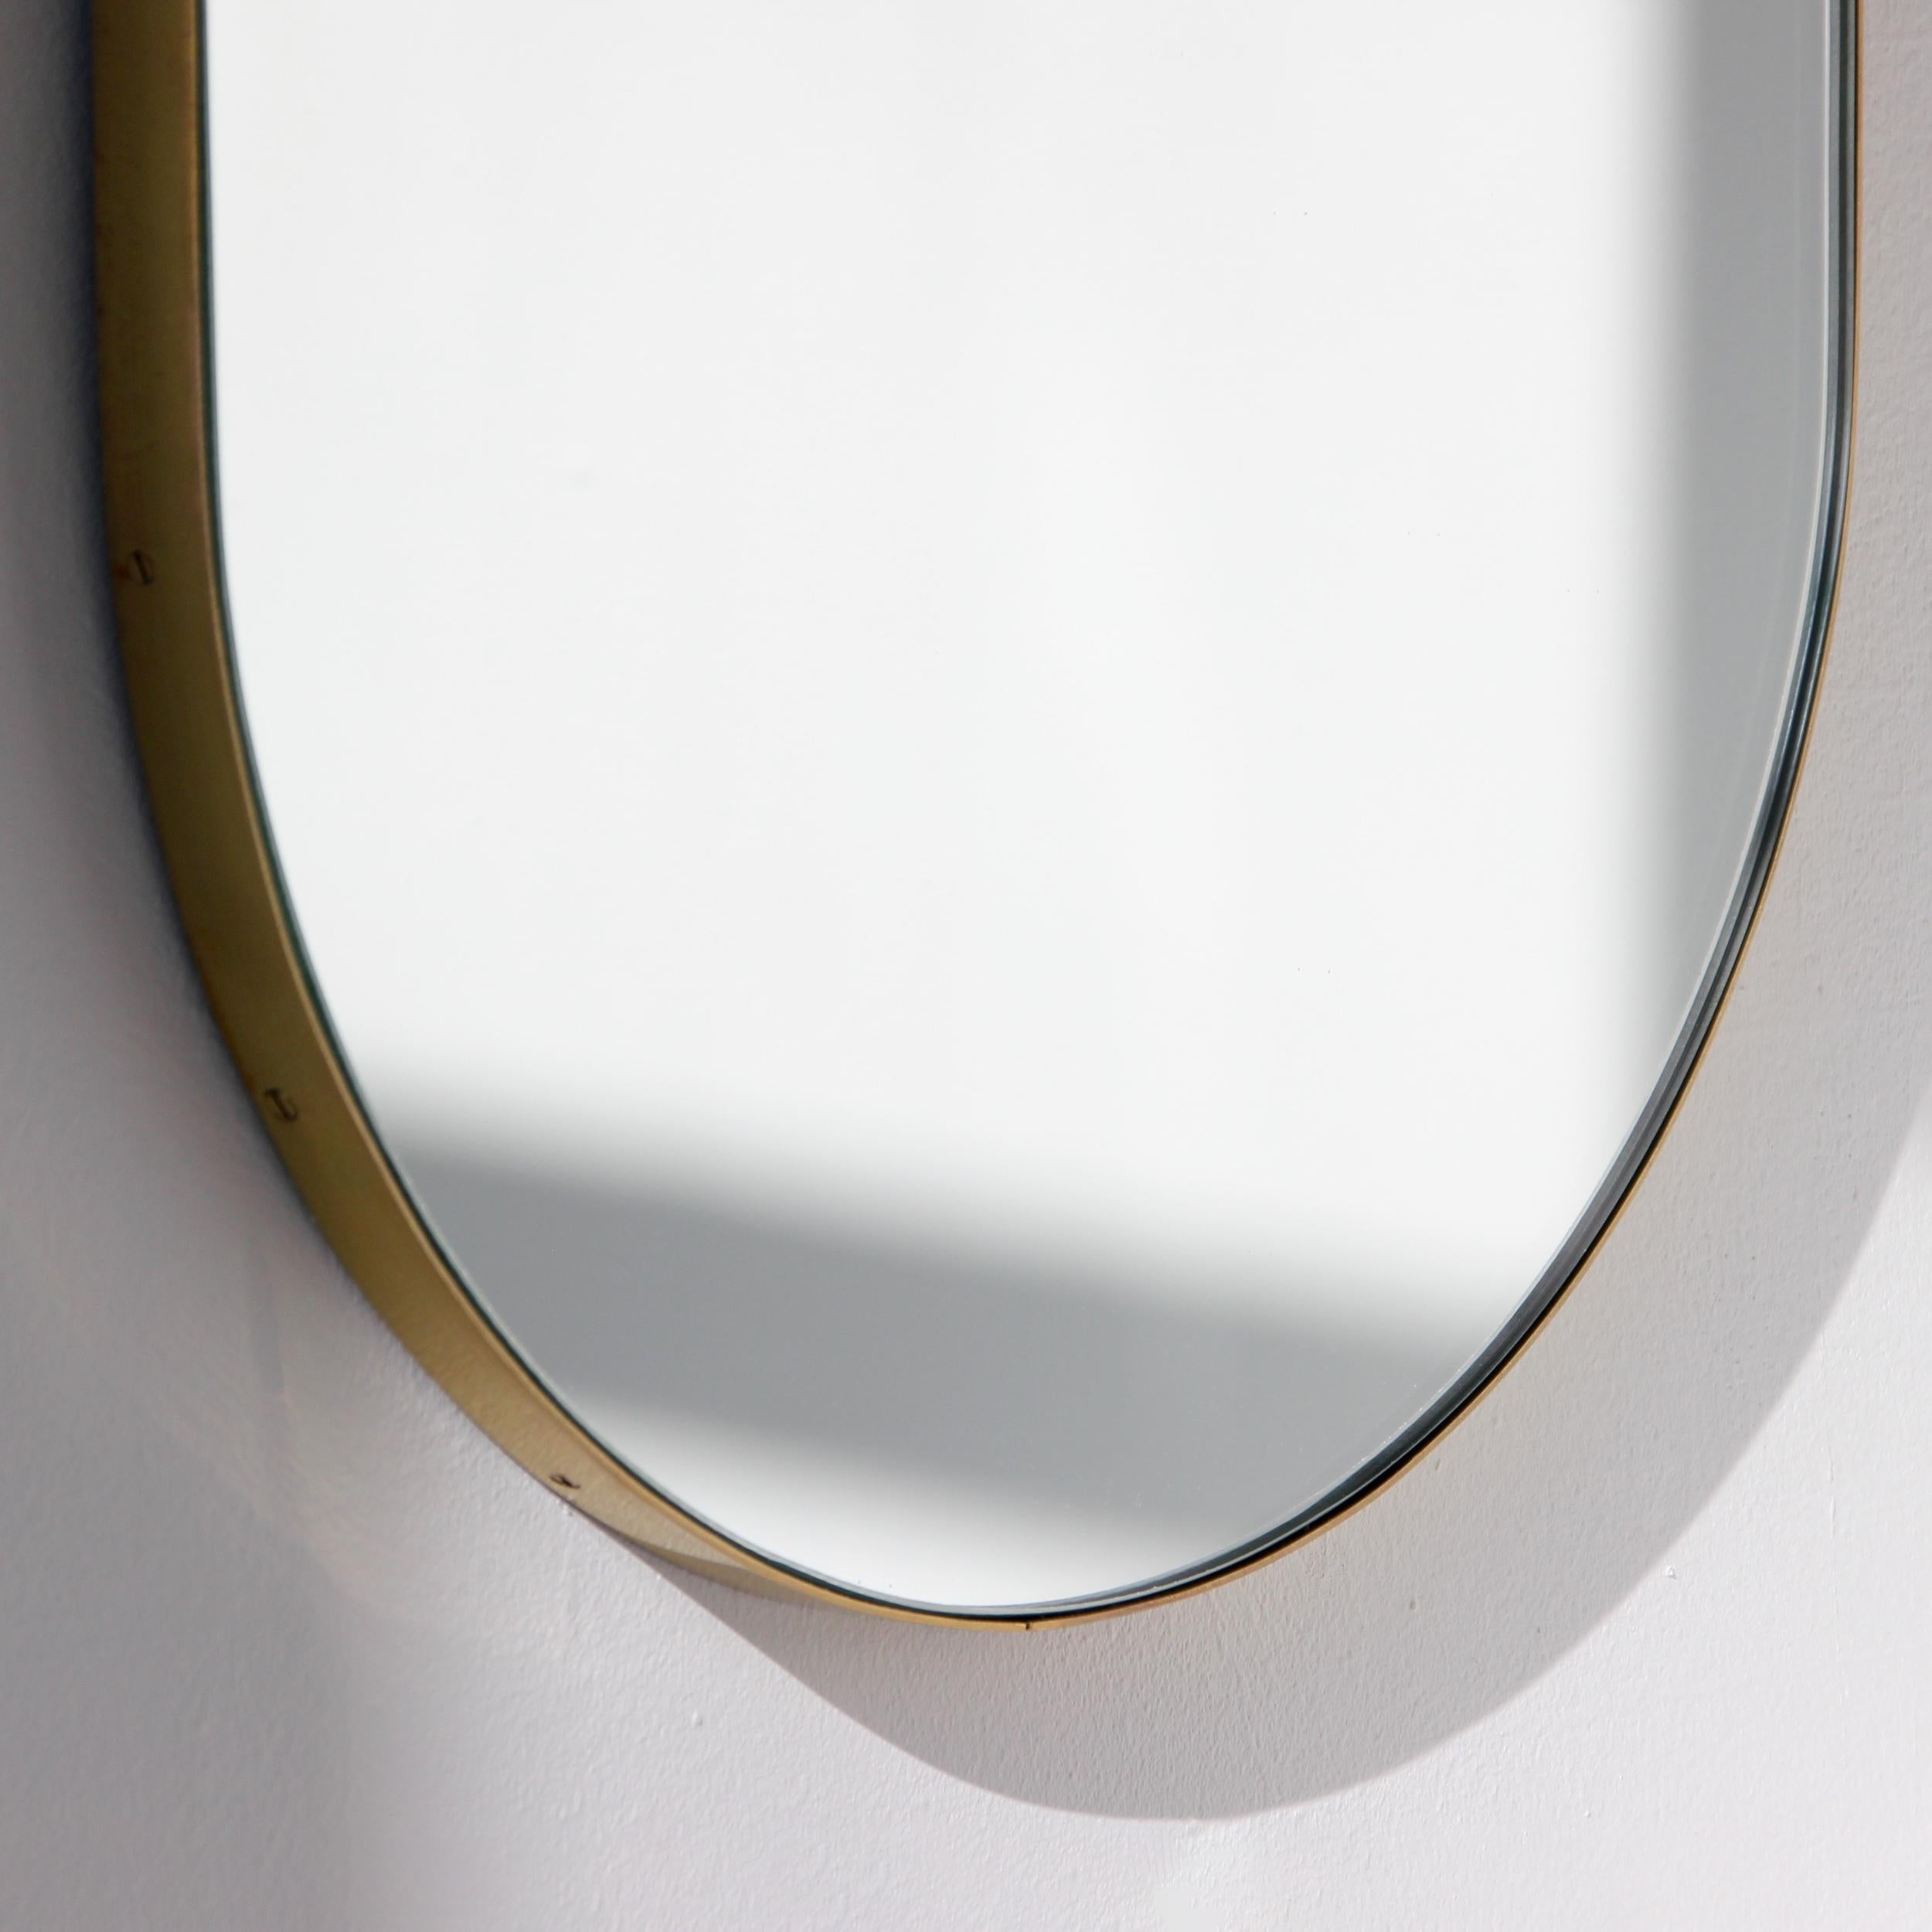 Brushed In Stock Capsula Pill Shaped Mirror with Demister Pad, Brass Frame, XL